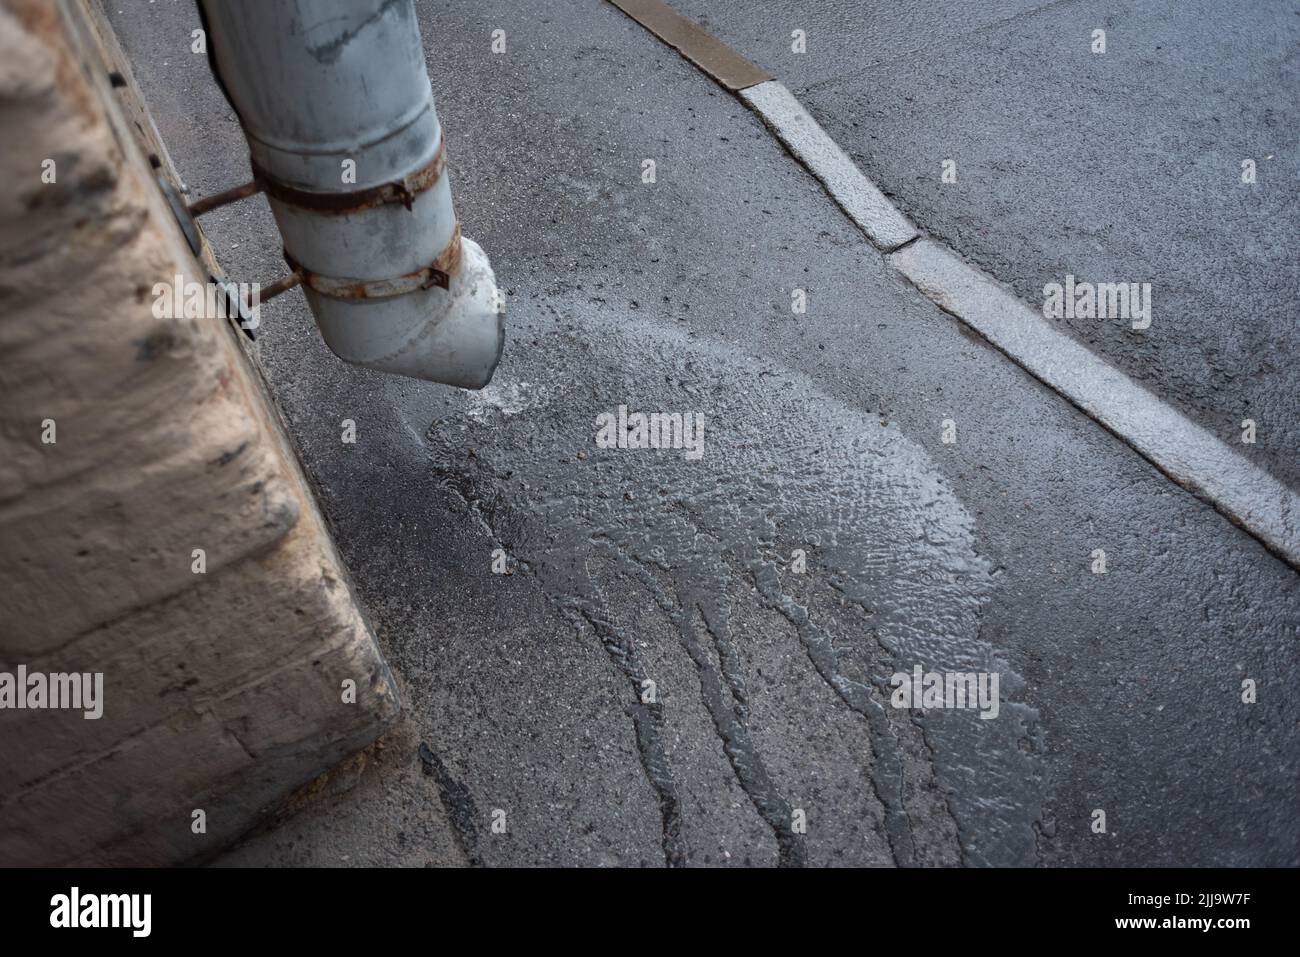 Rainy weather concept. Drainpipe through which water flows from rain that has just begun. Stock Photo